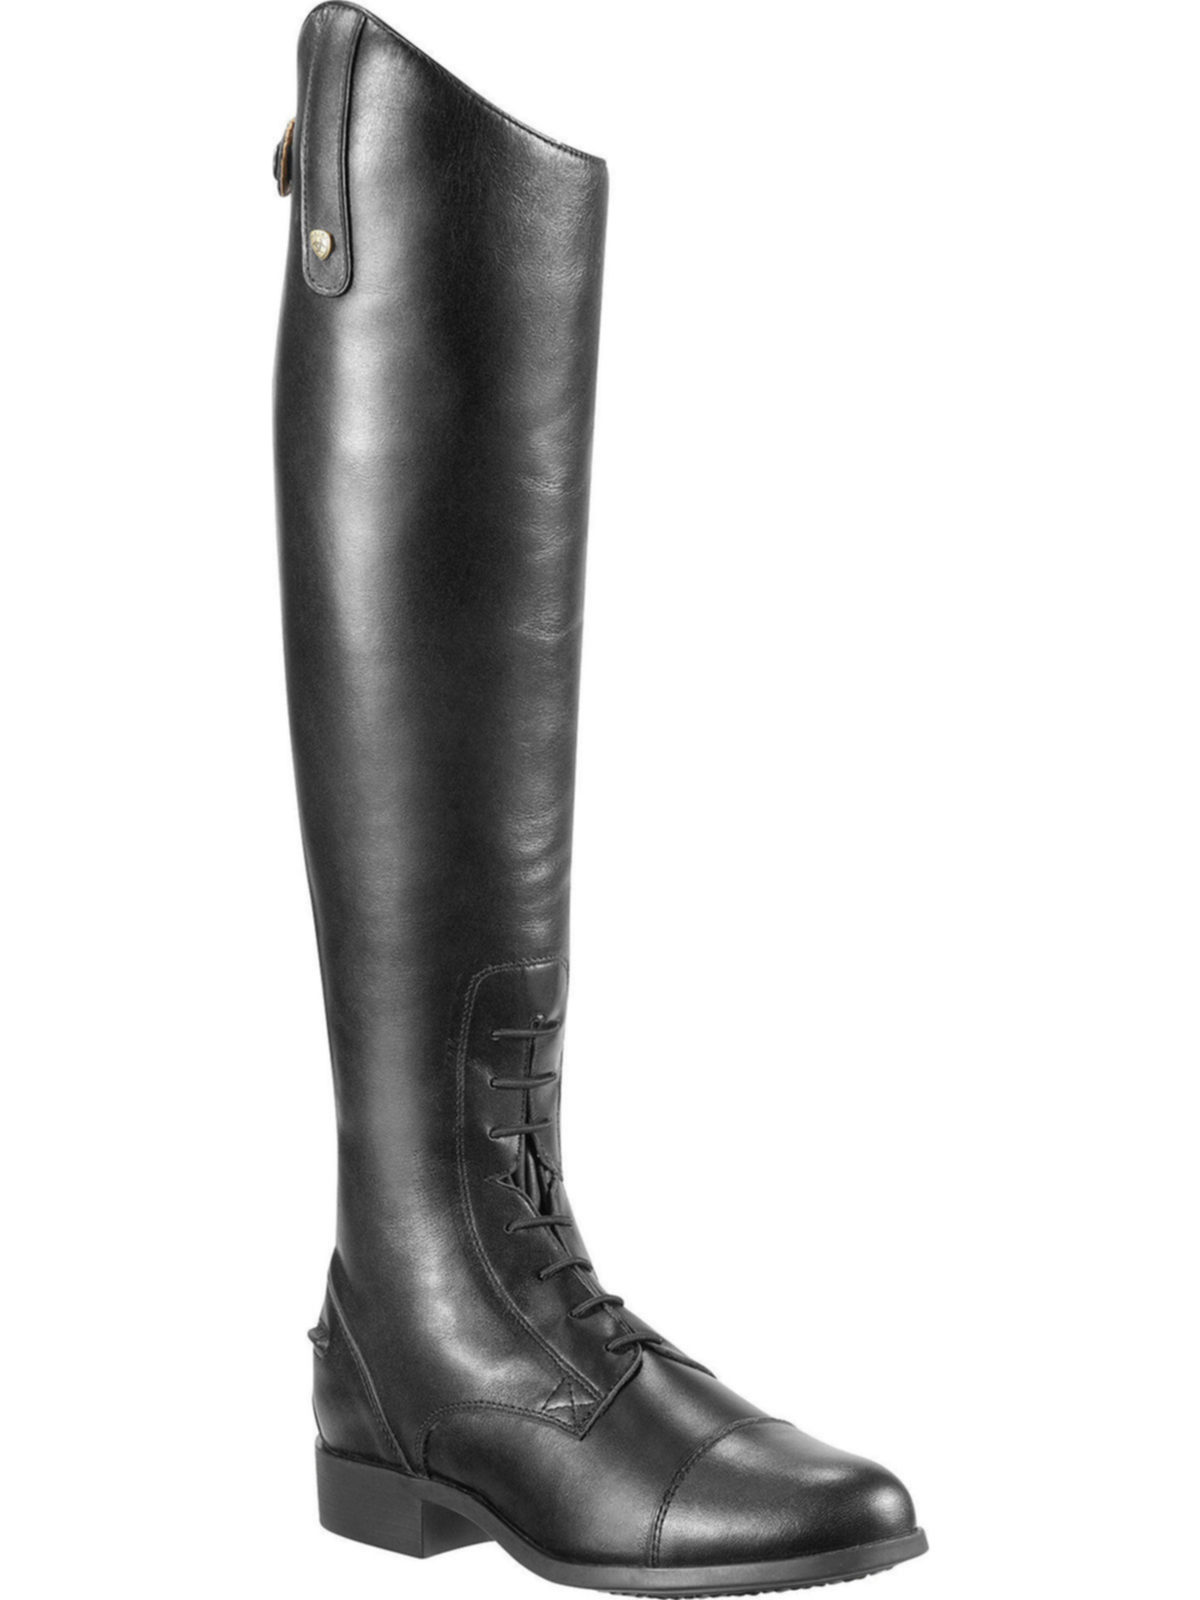 equestrian riding boots